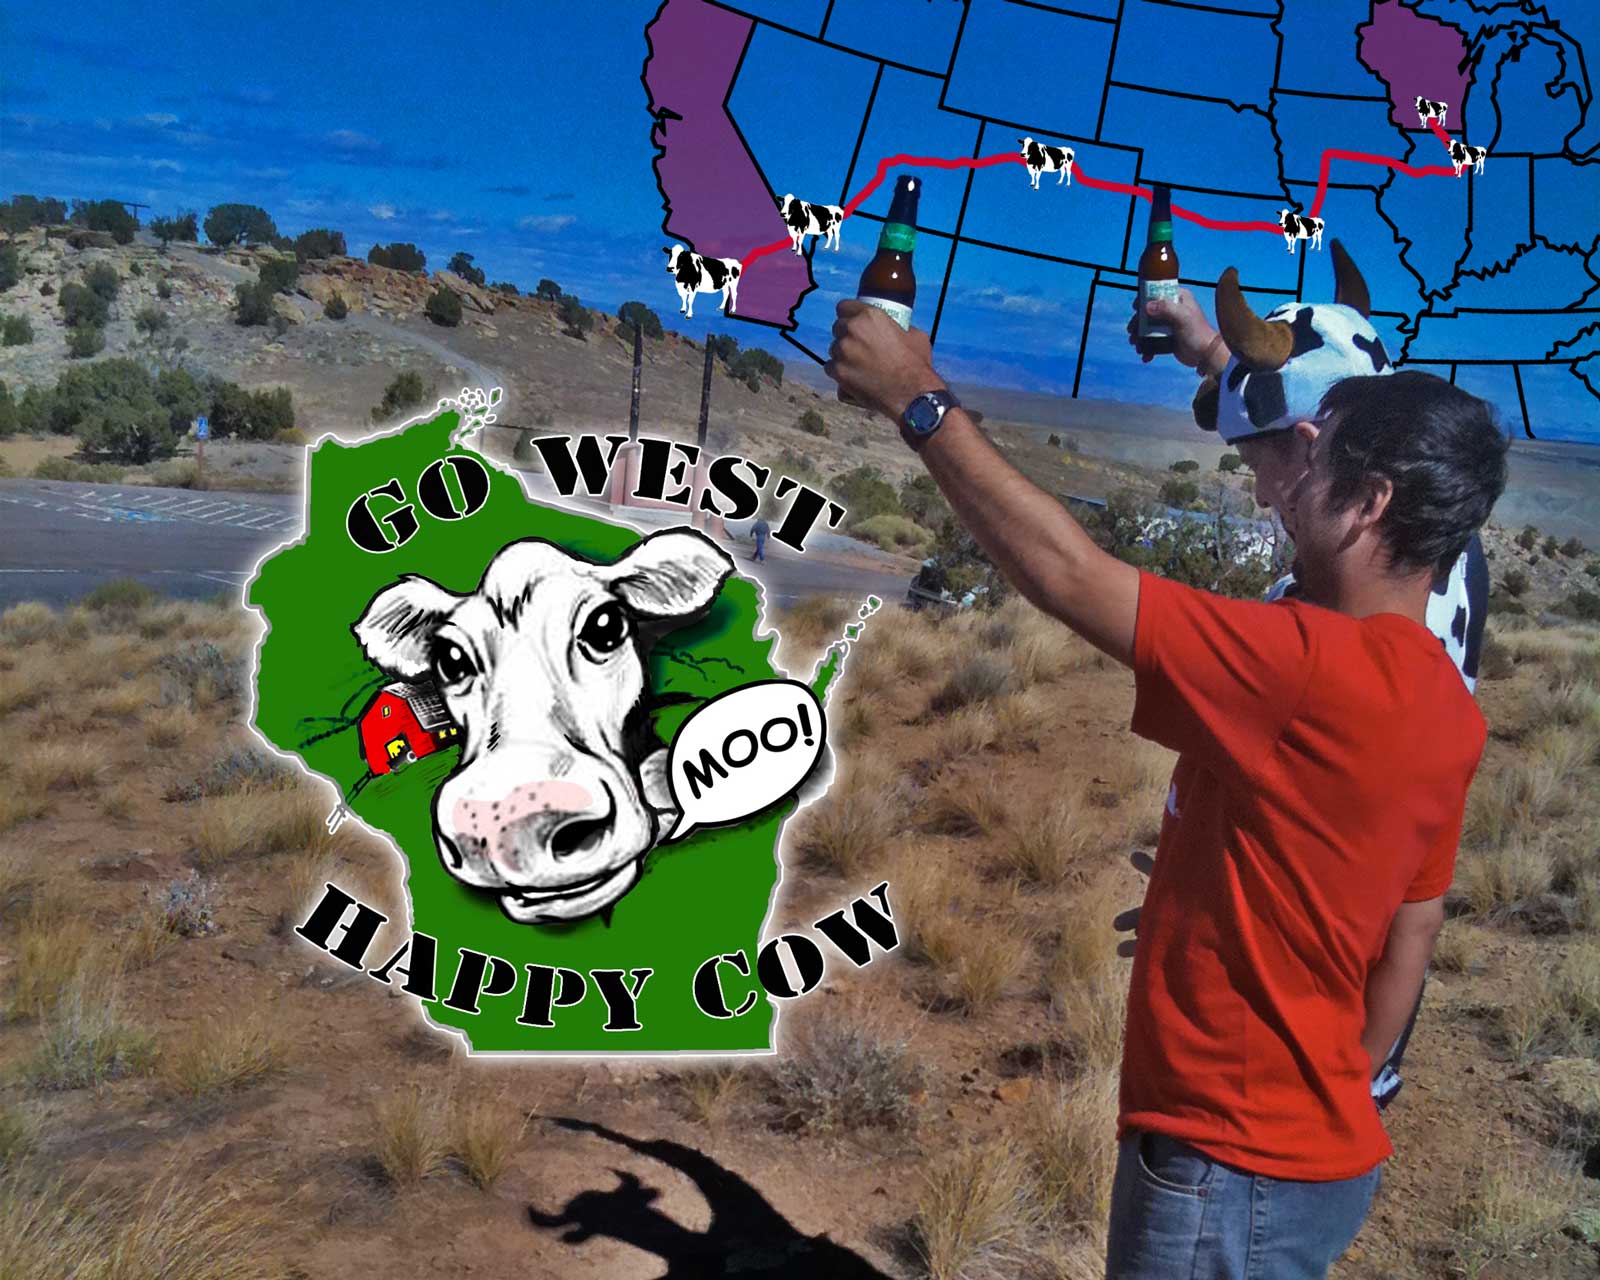 Go West Happy Cow poster